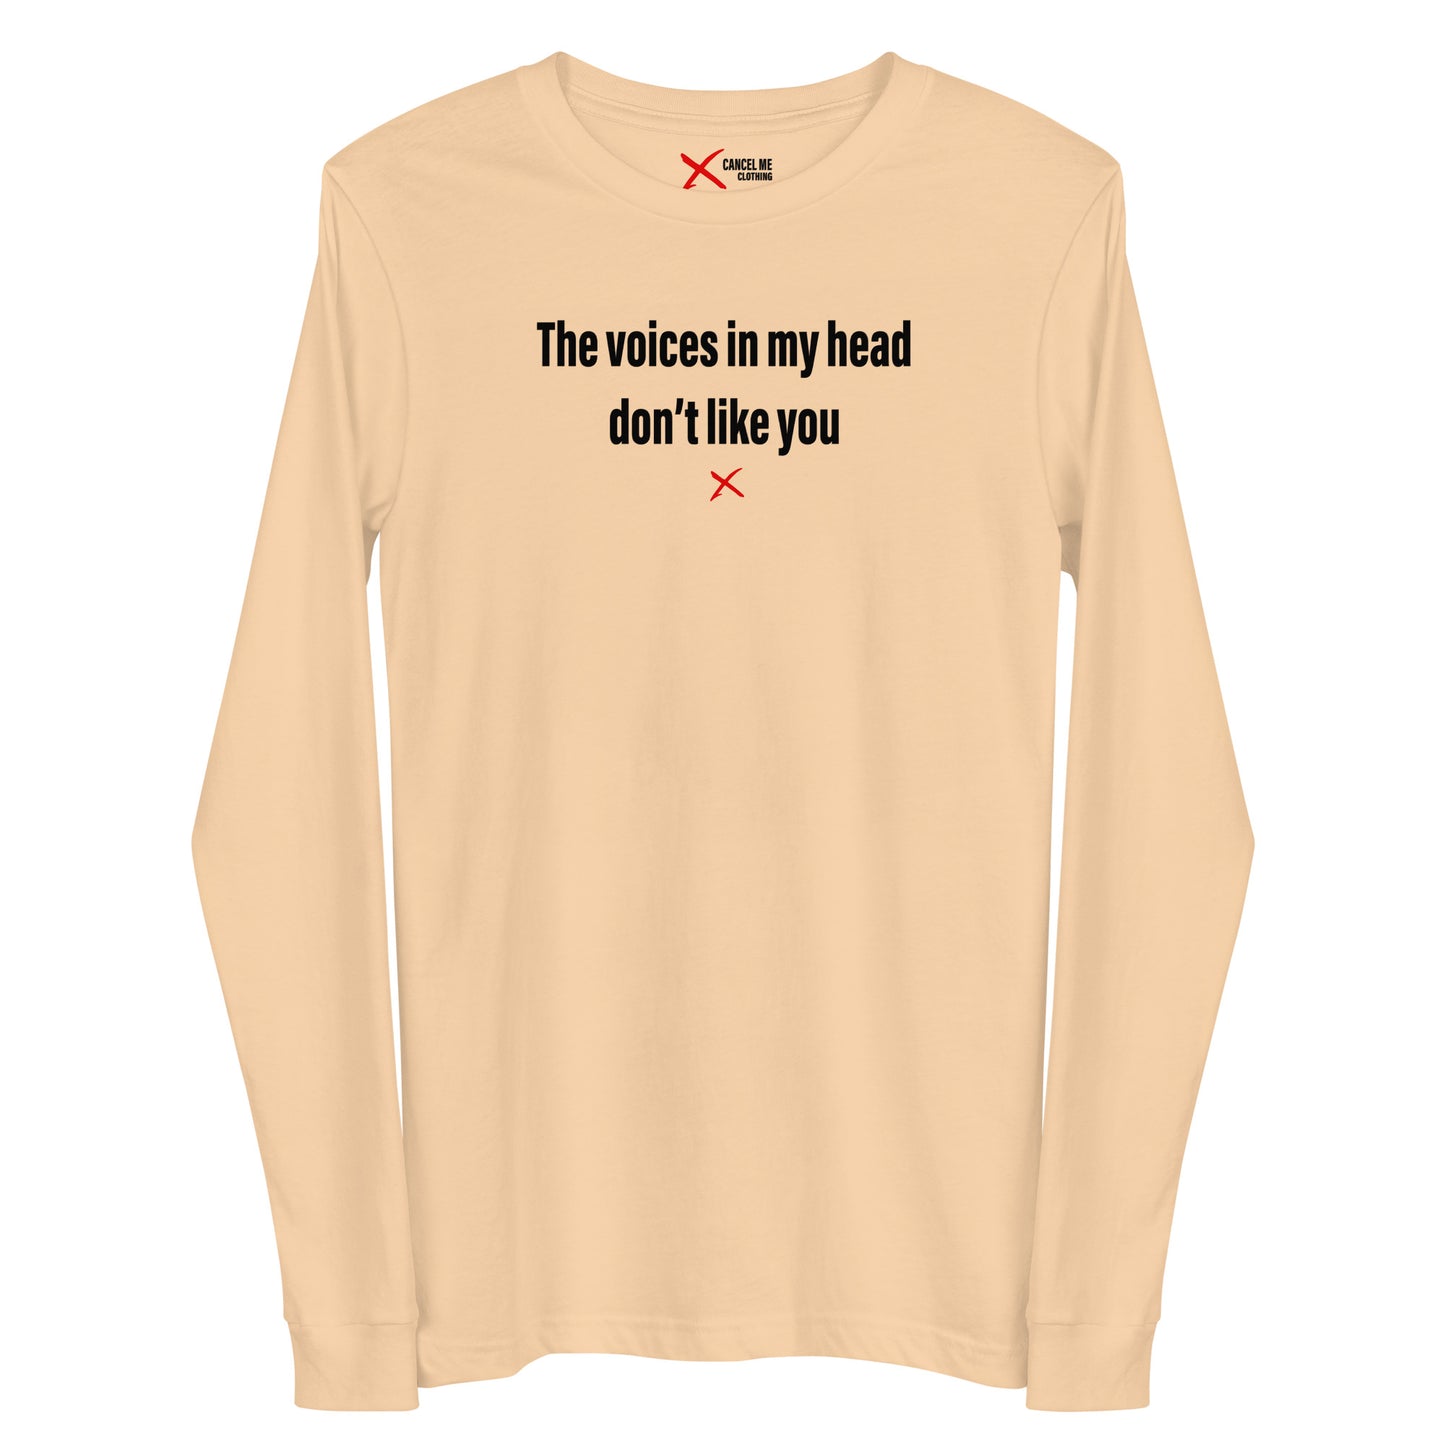 The voices in my head don't like you - Longsleeve